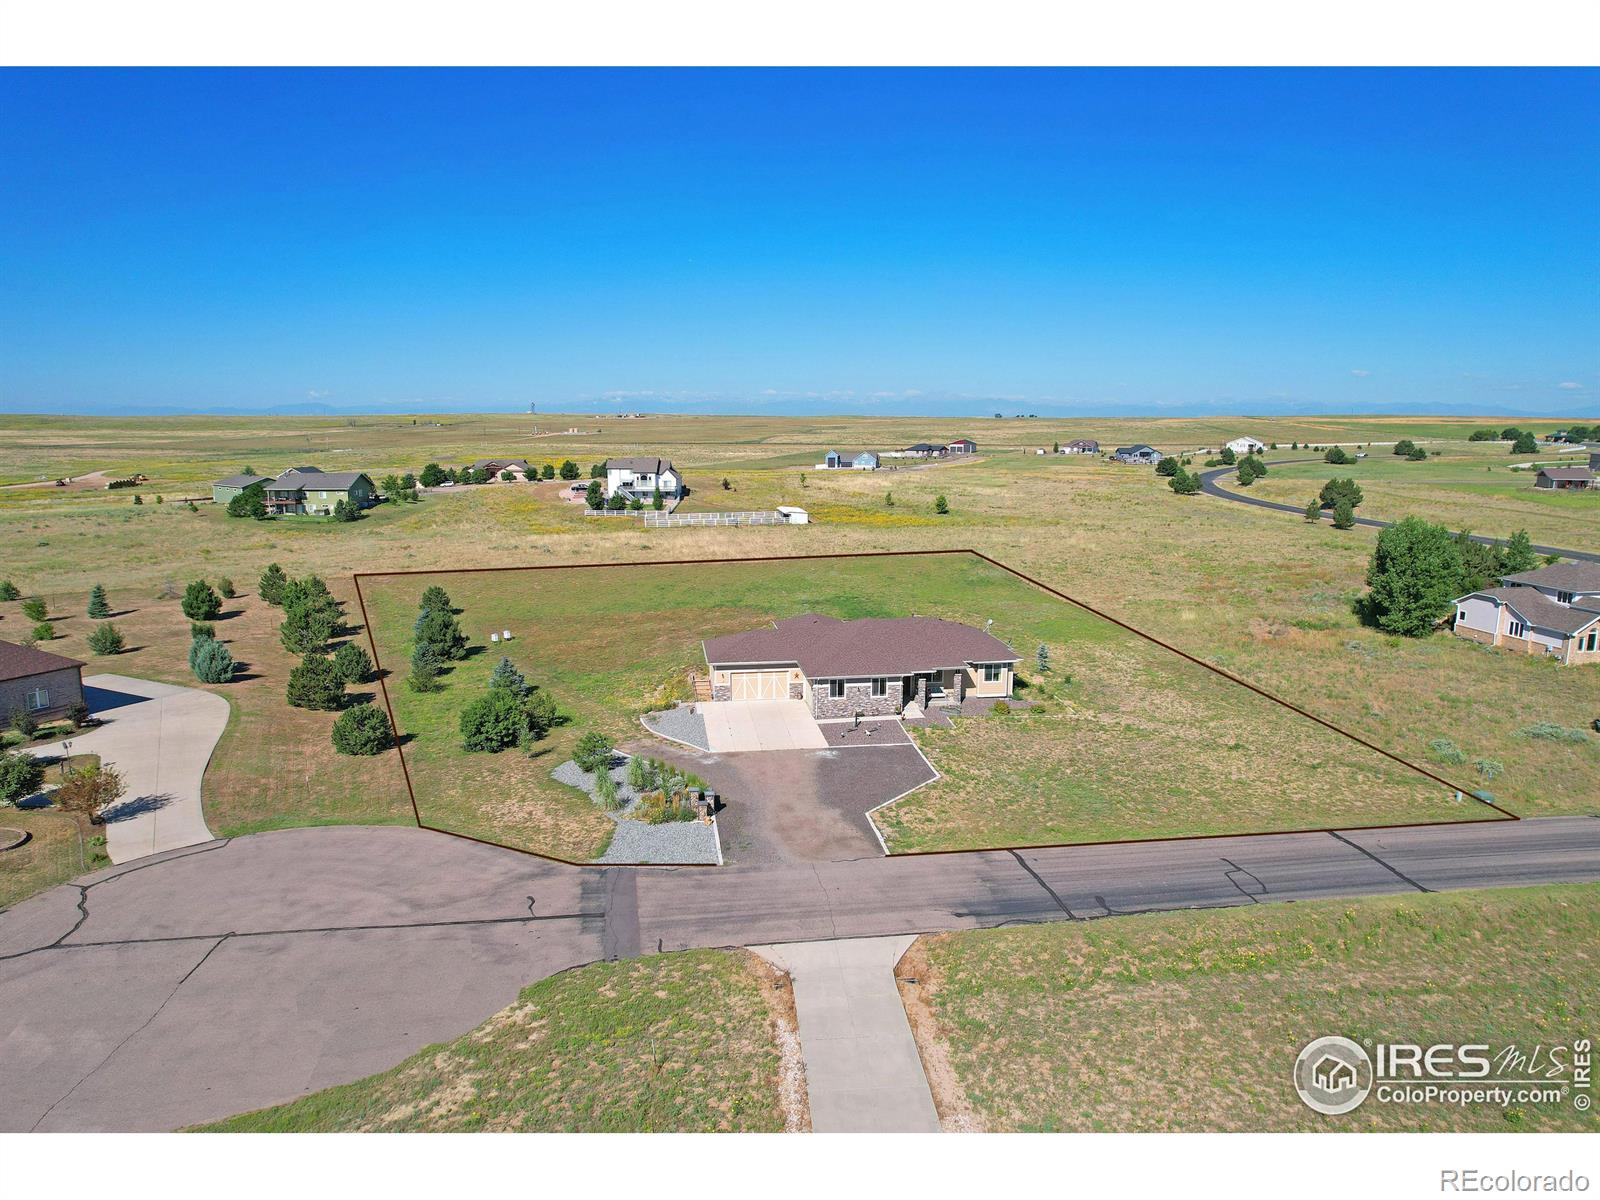 CMA Image for 16477  burghley court,Platteville, Colorado